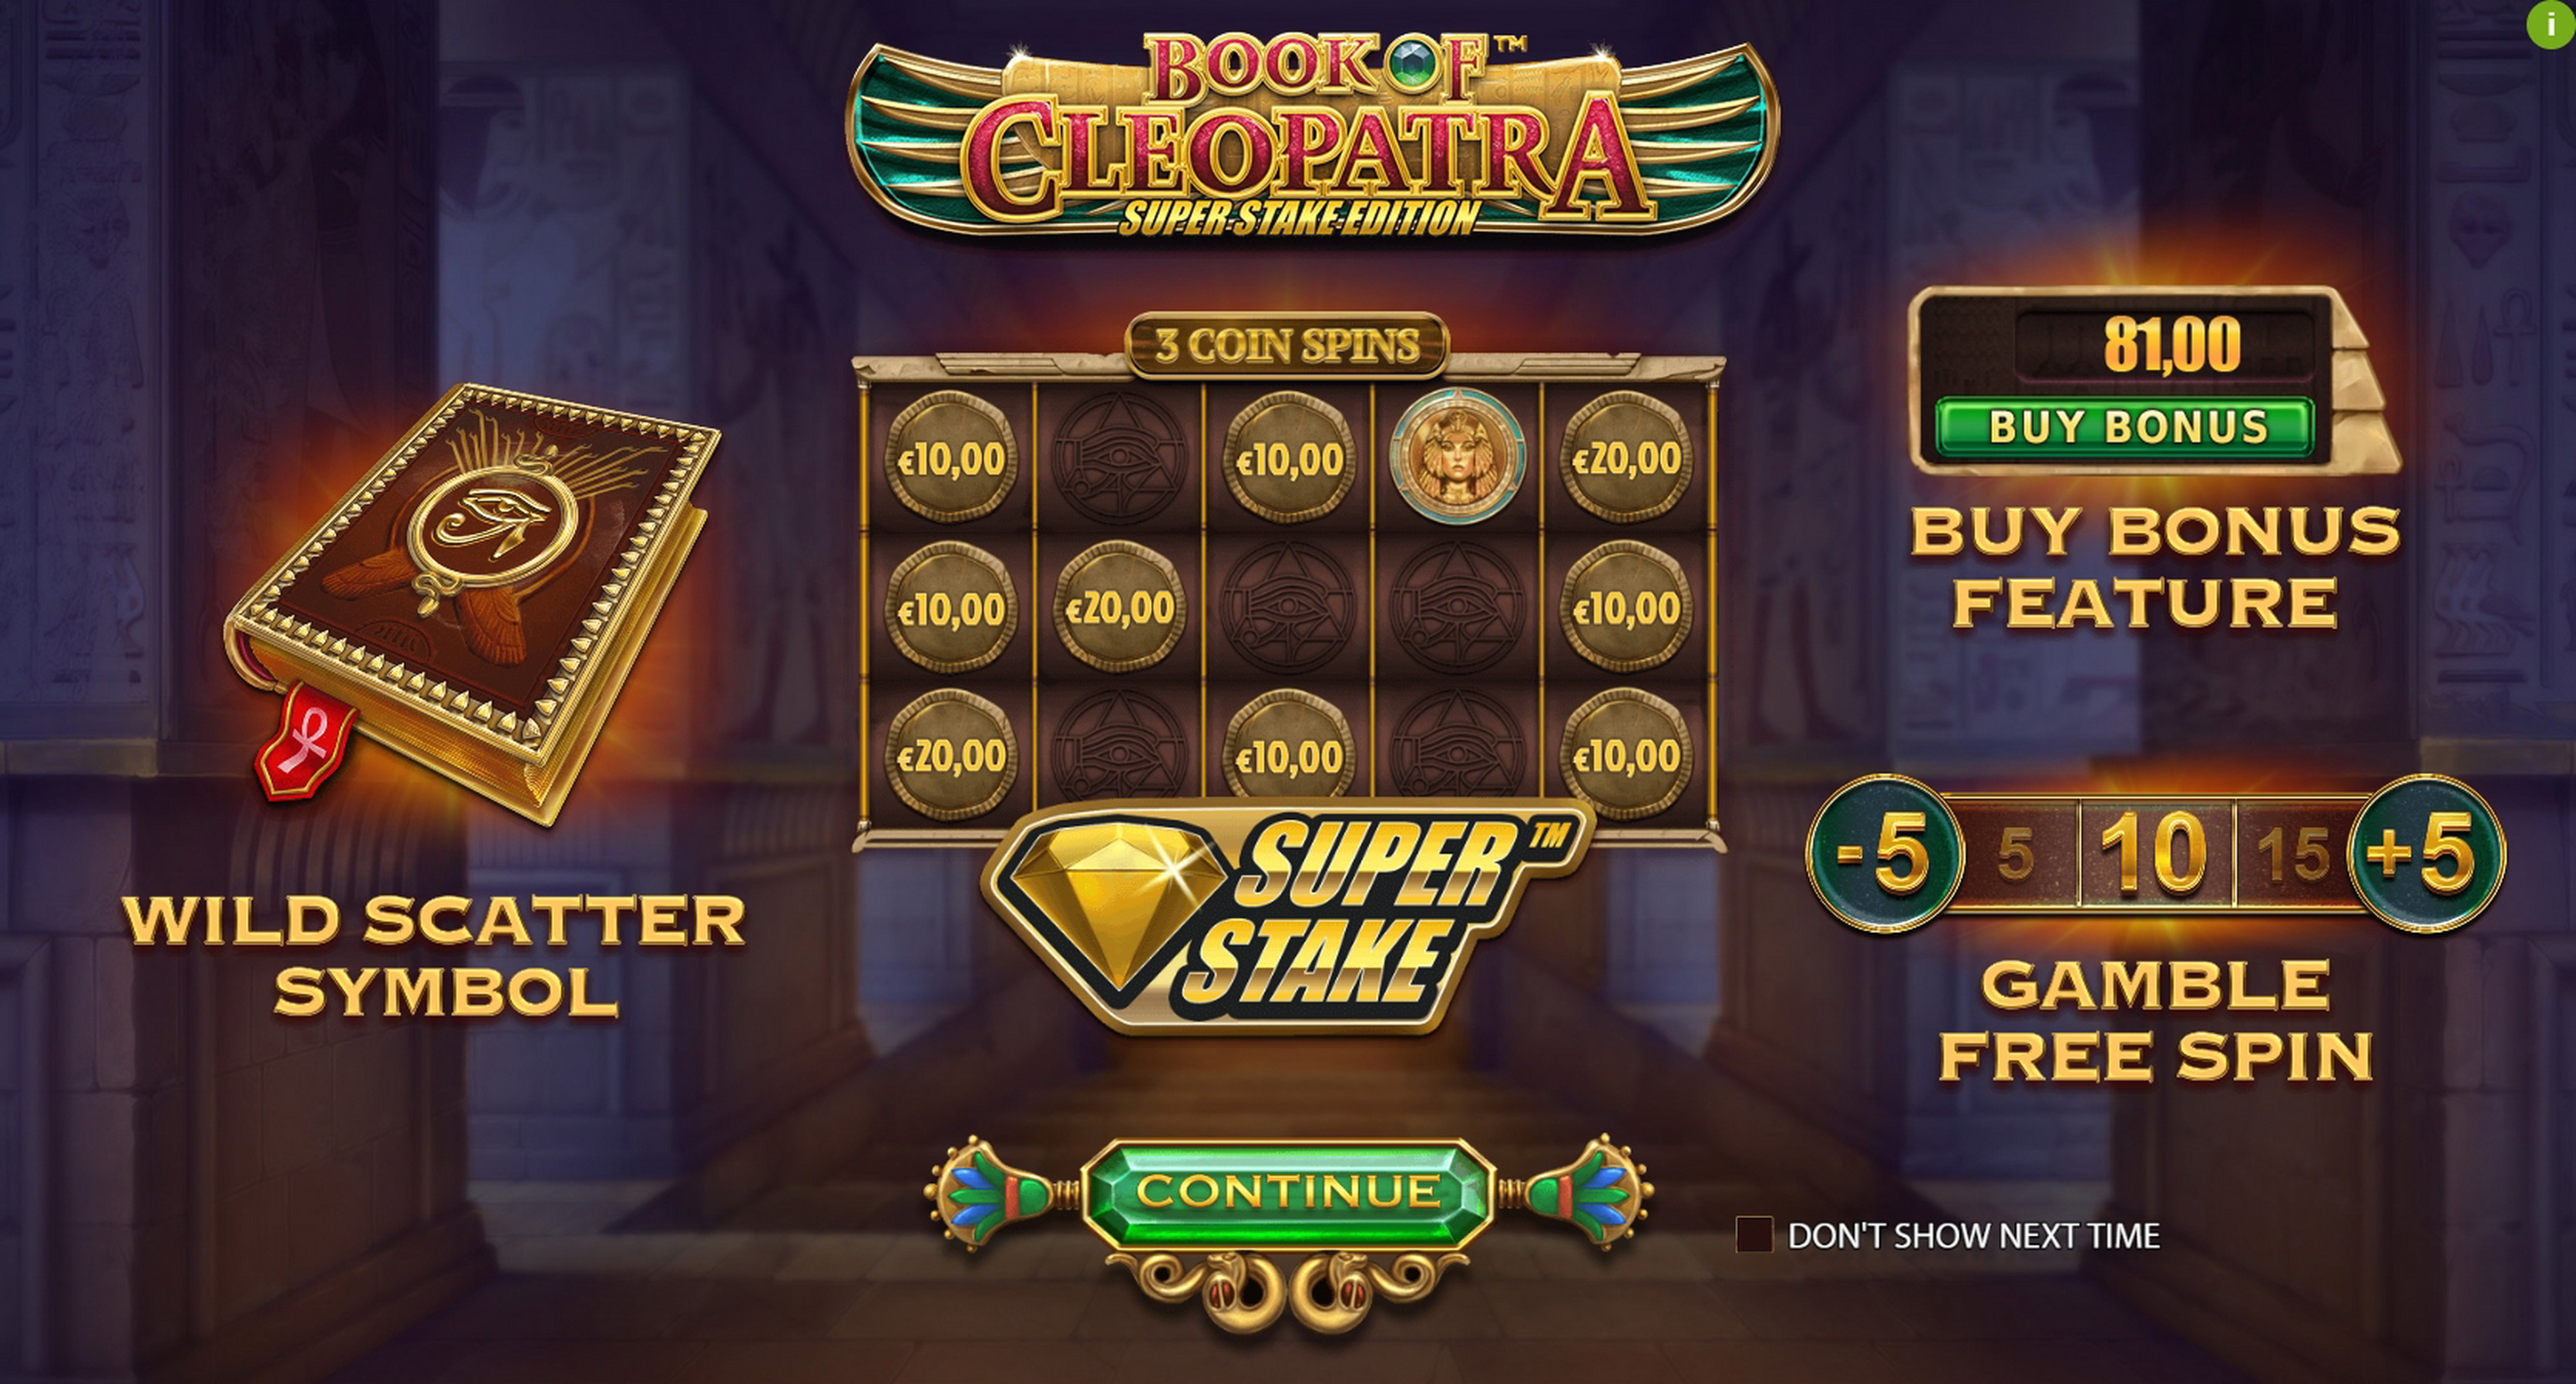 Play Book of Cleopatra Super Stake Edition Free Casino Slot Game by Stakelogic